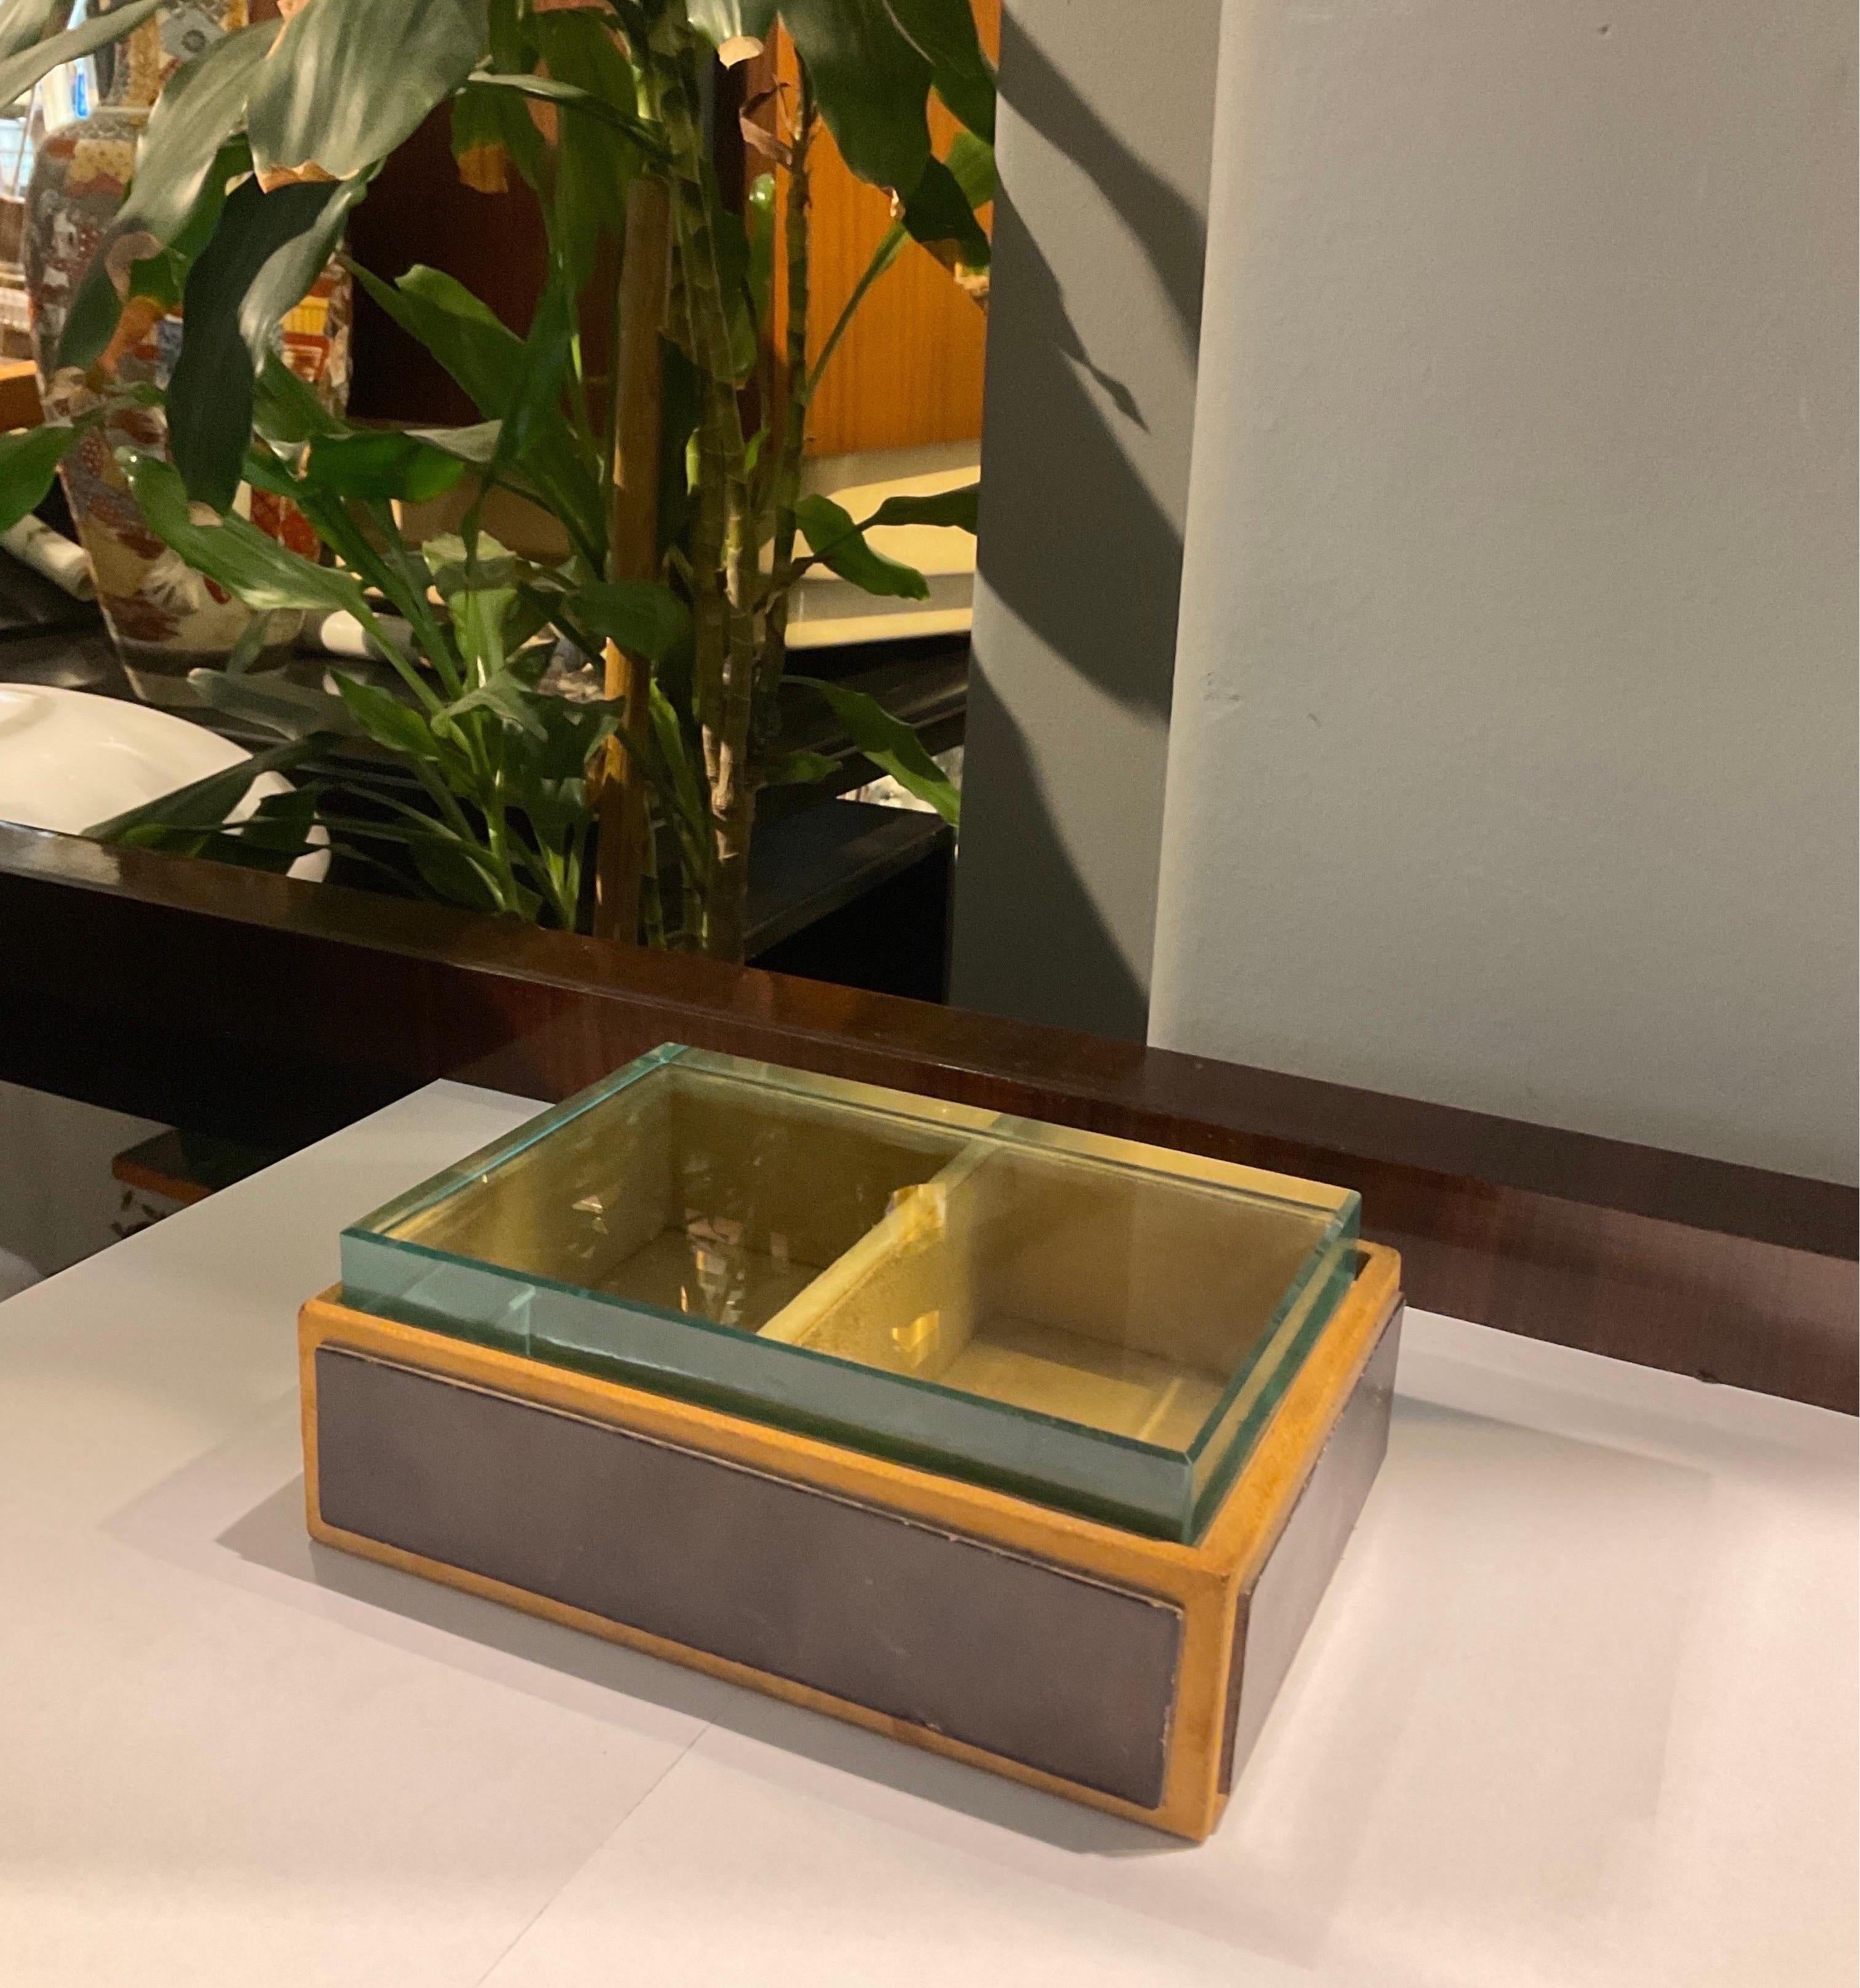 Magnificent rectangular shaped wooden jewellery box covered with leather, topped by a Nile green glass plate that gives perfect visibility from the outside to the inside of the box. It is attributable to the famous Italian designer Pietro Chiesa in